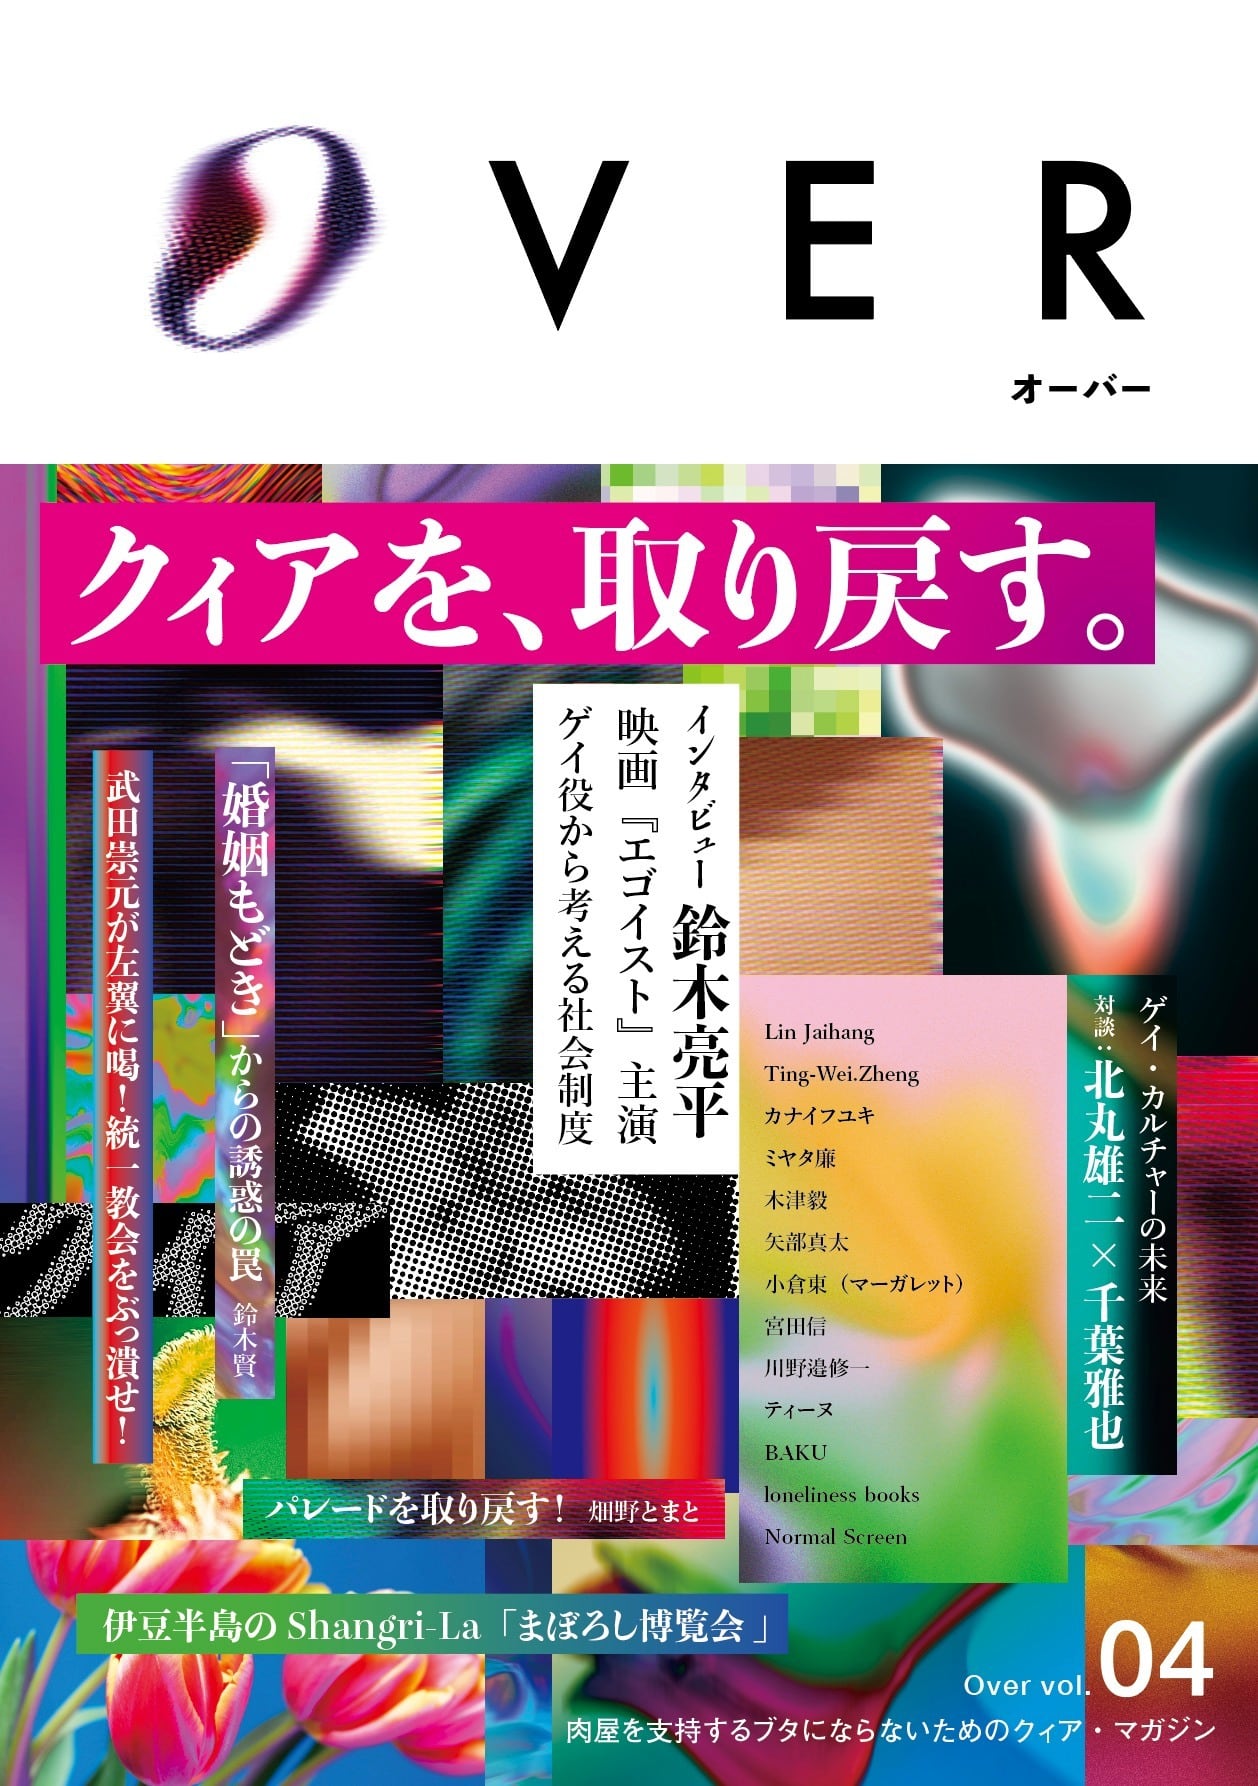 Over vol.04 | overmagazine powered by BASE